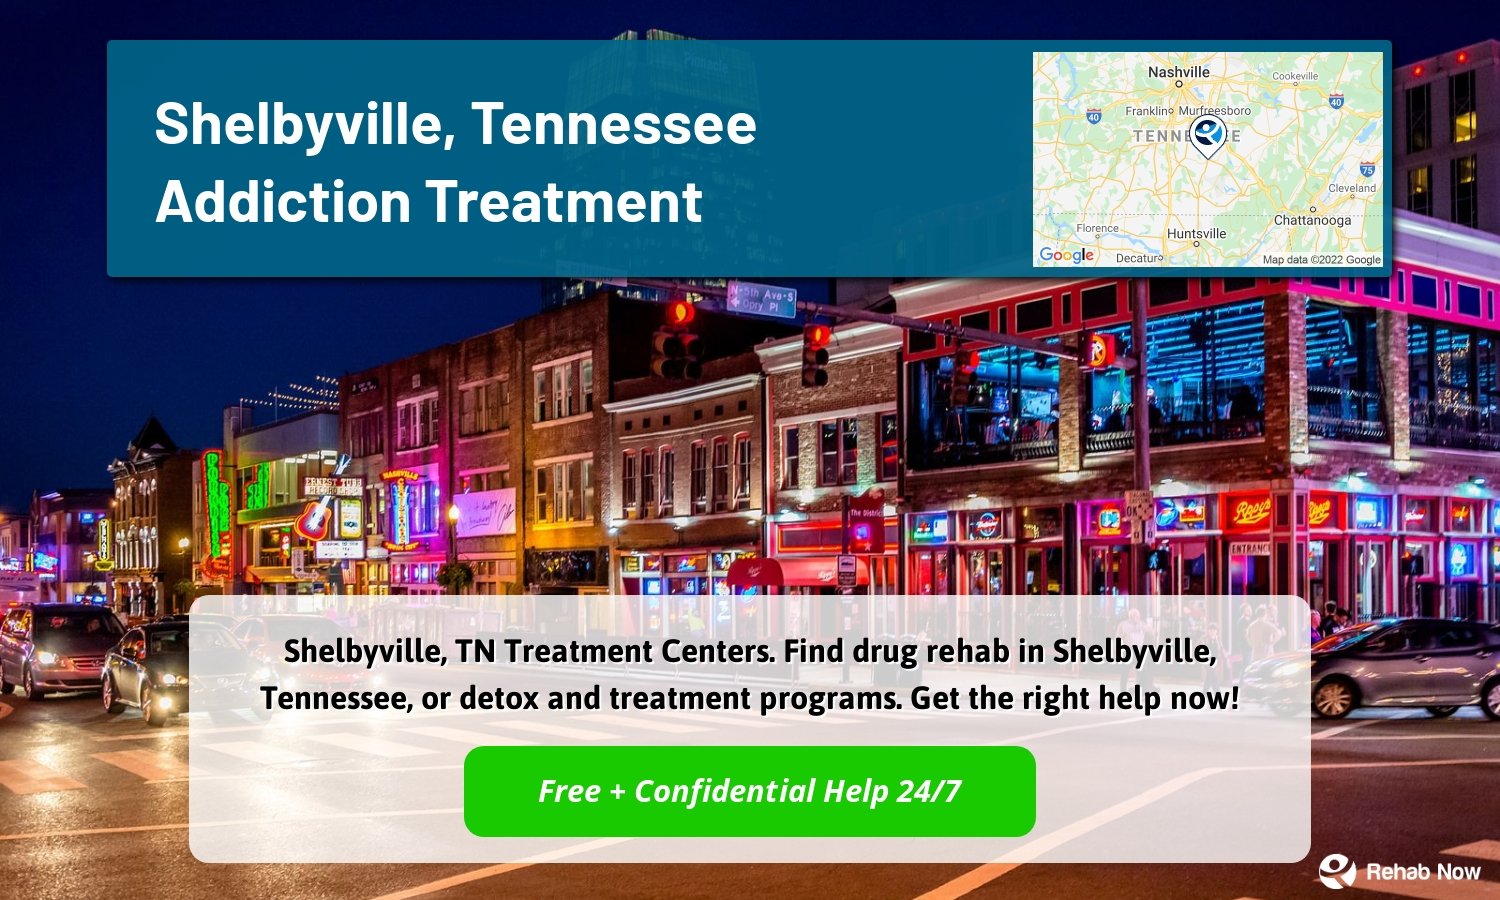 Shelbyville, TN Treatment Centers. Find drug rehab in Shelbyville, Tennessee, or detox and treatment programs. Get the right help now!